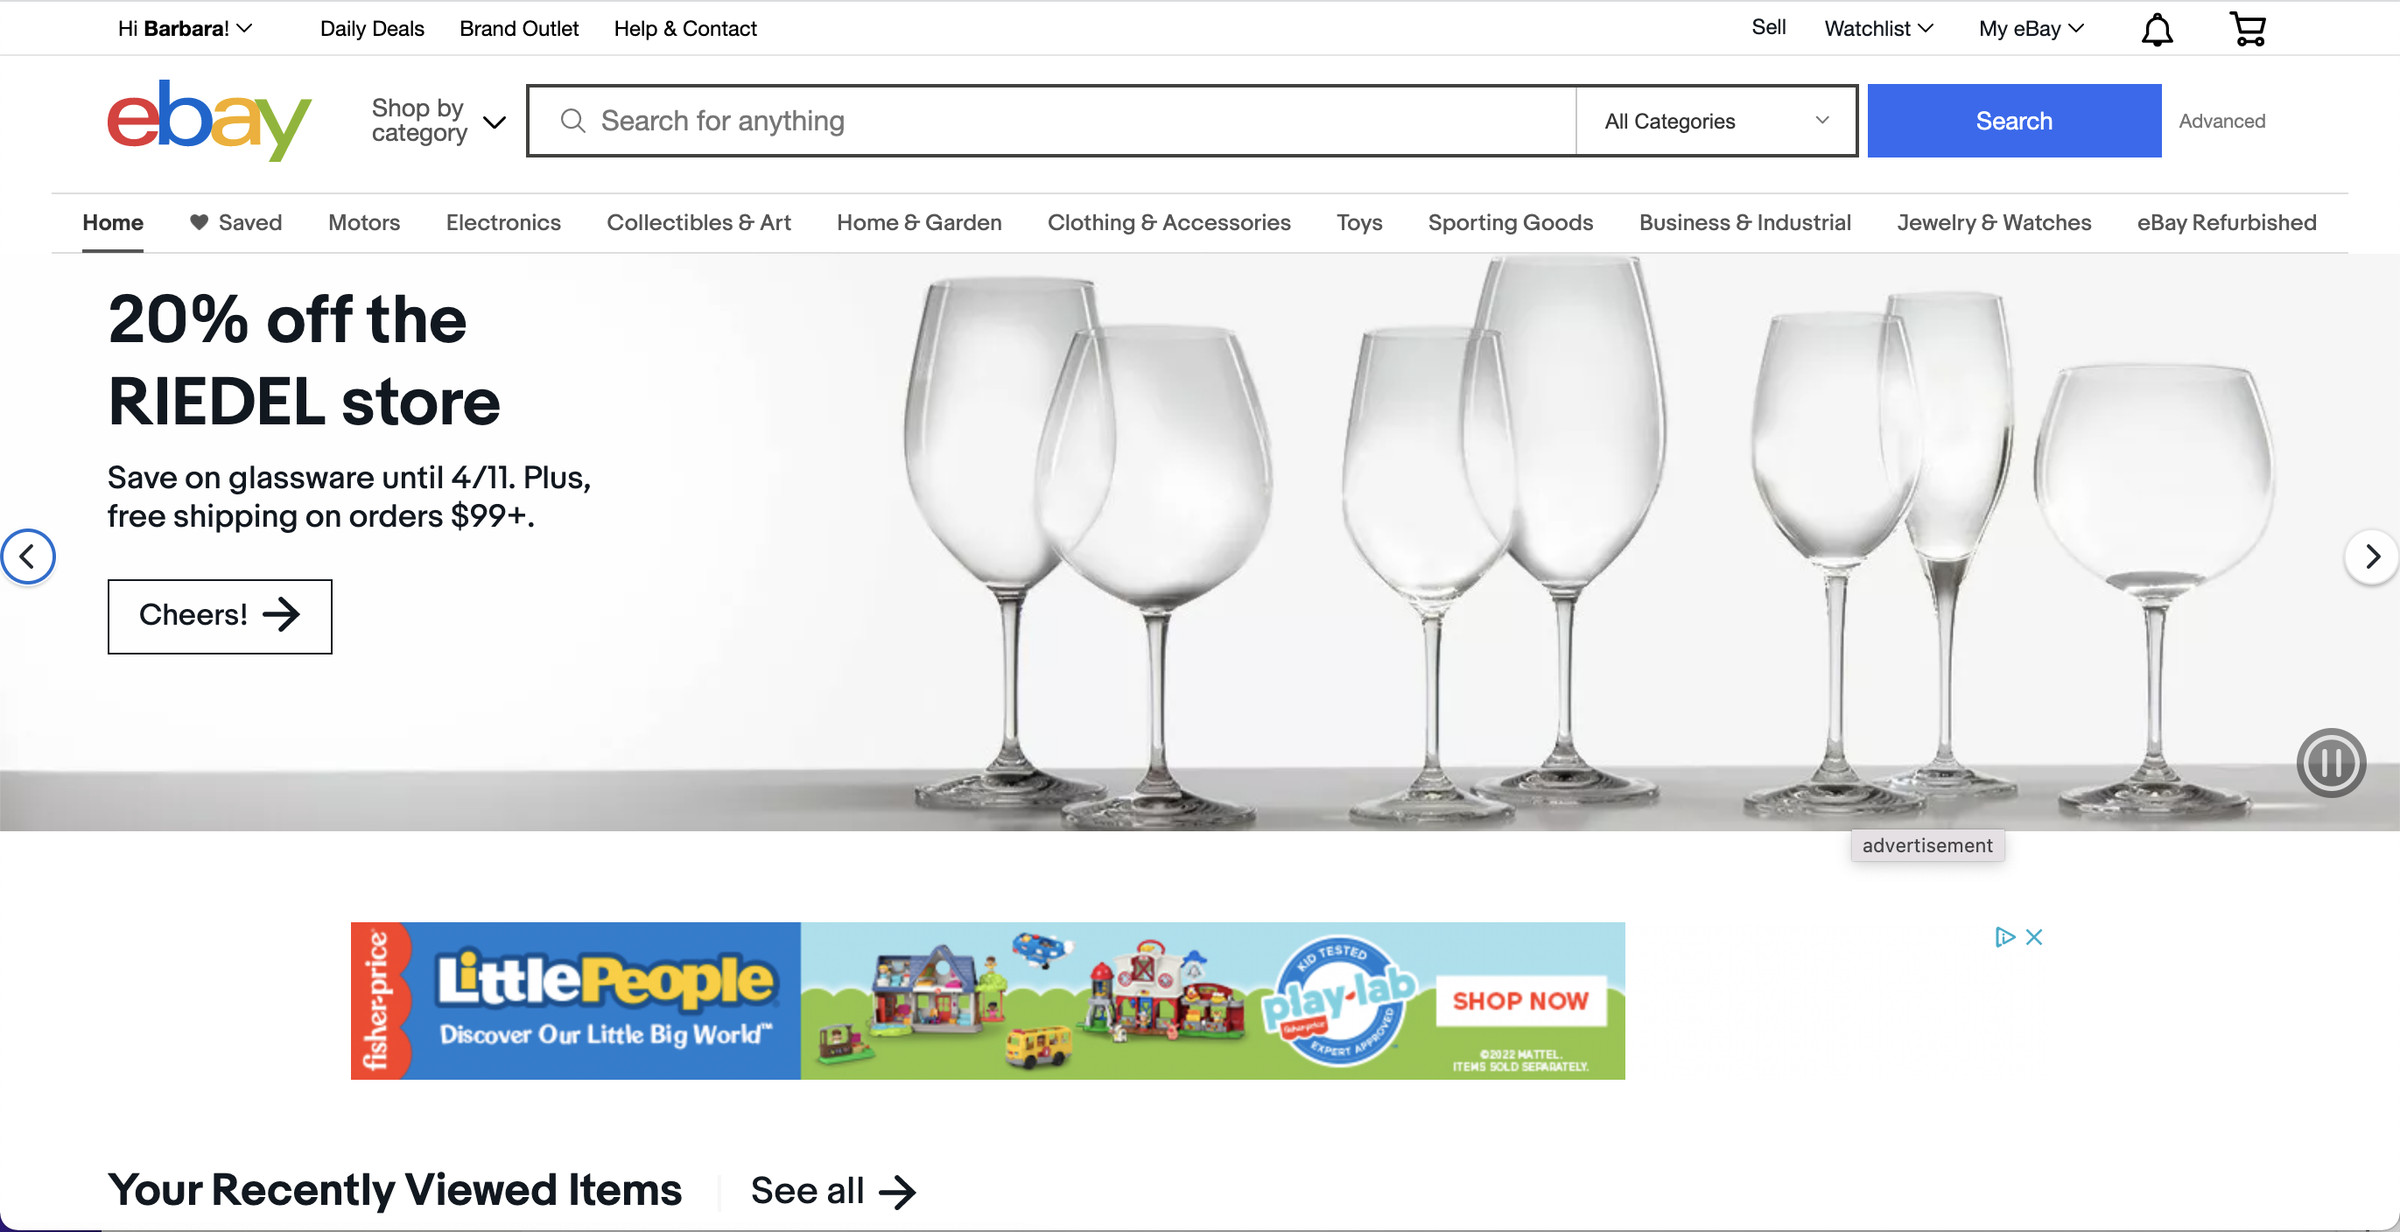 The eBay front page showing some wine glasses with the caption “20% off the Riedel Store” and an ad for “LittlePeople” below it.